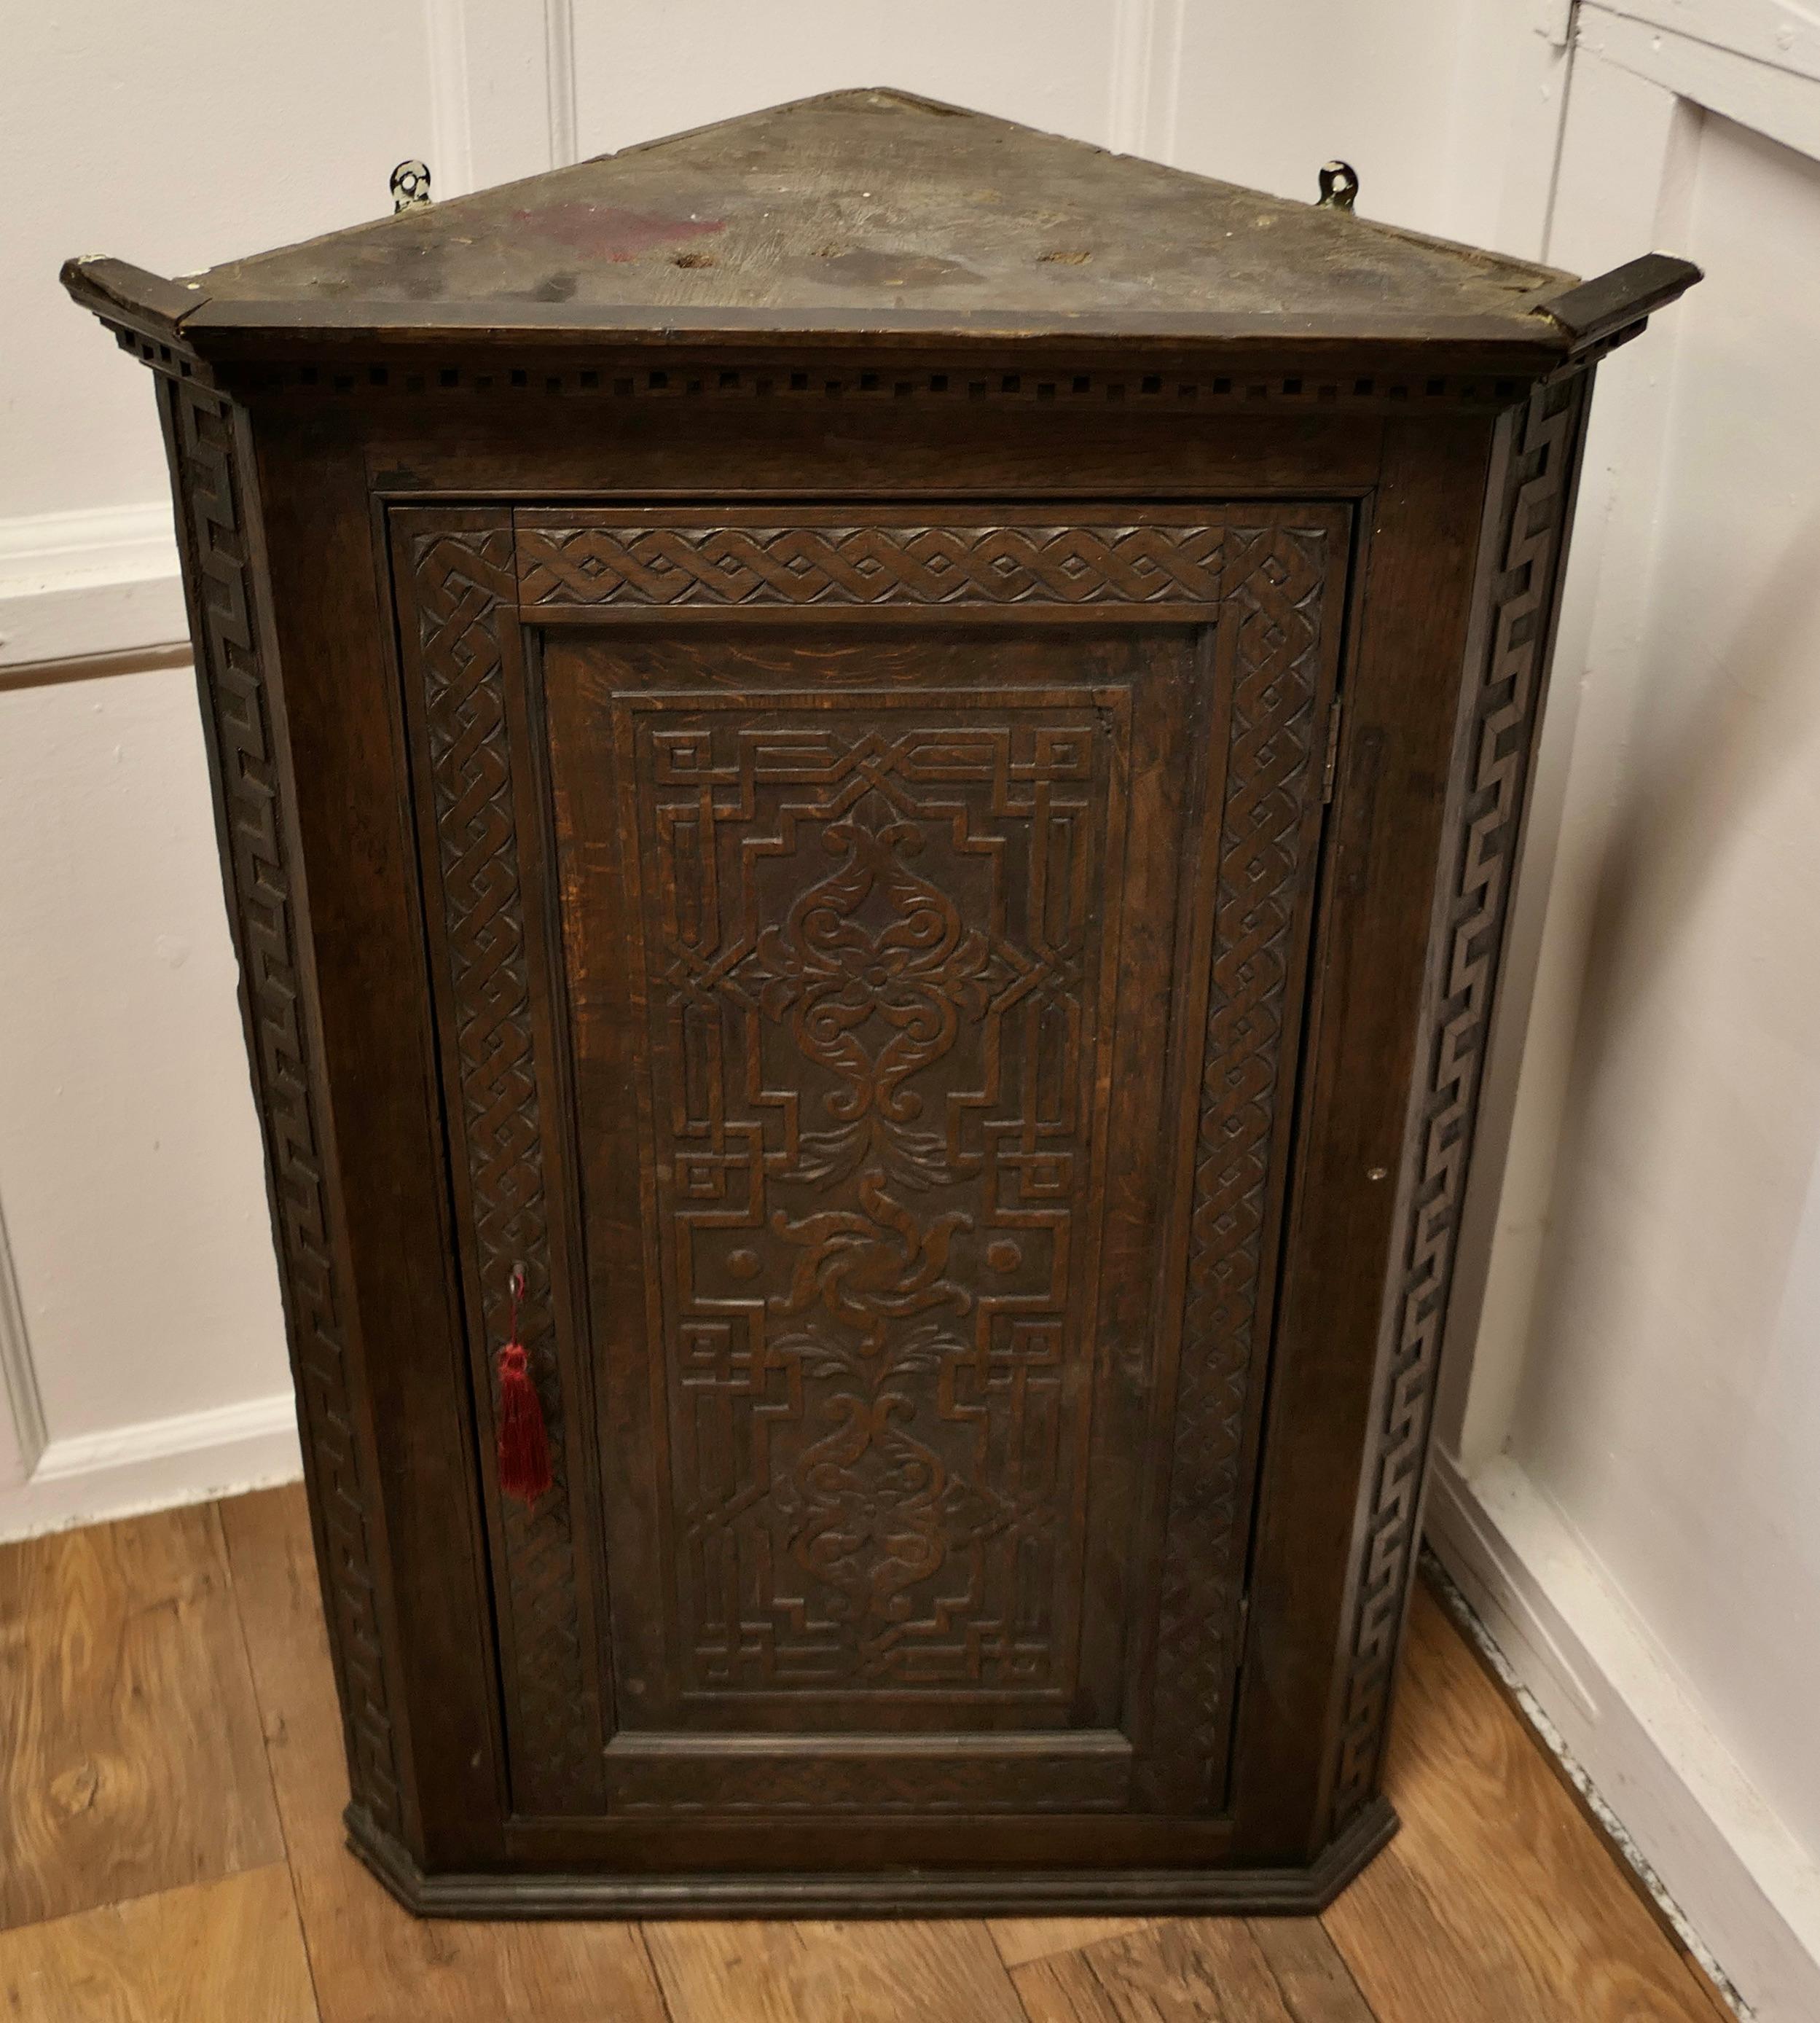 18th Century  Carved Oak Corner Cupboard

This is a good piece, a large 18th Century Carved Oak Corner Cupboard
The front of the cupboard has a geometrically carved panel enclosing 3 shaped corner shelves, the front sides and top cornice are in key